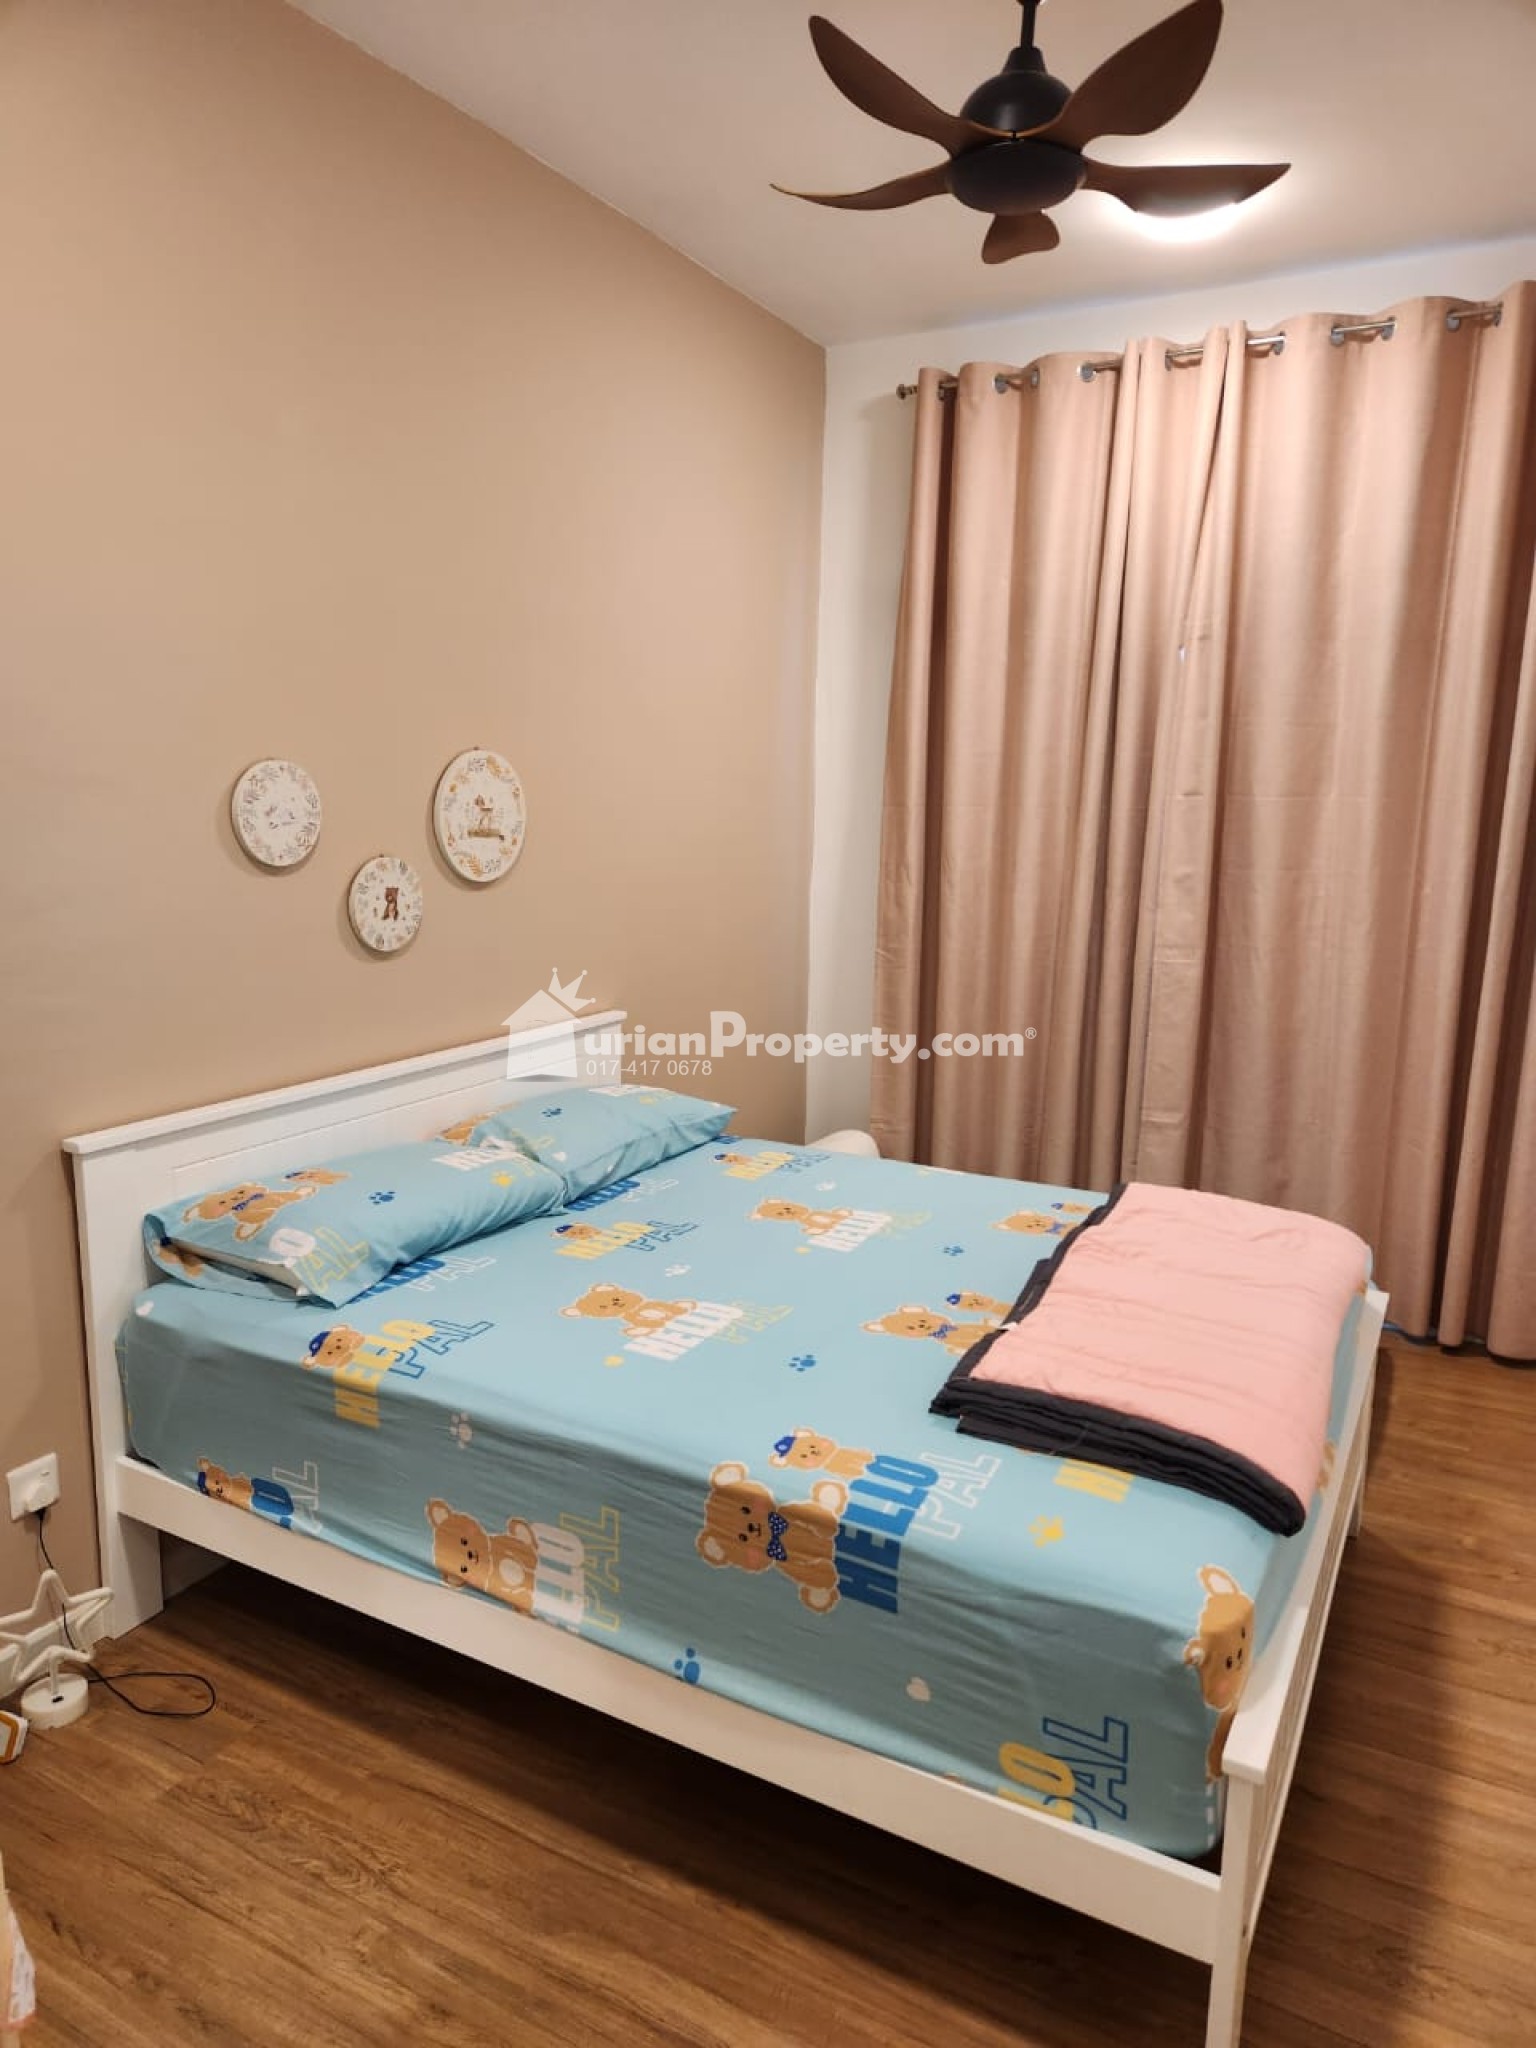 Condo For Rent at Sunway Serene